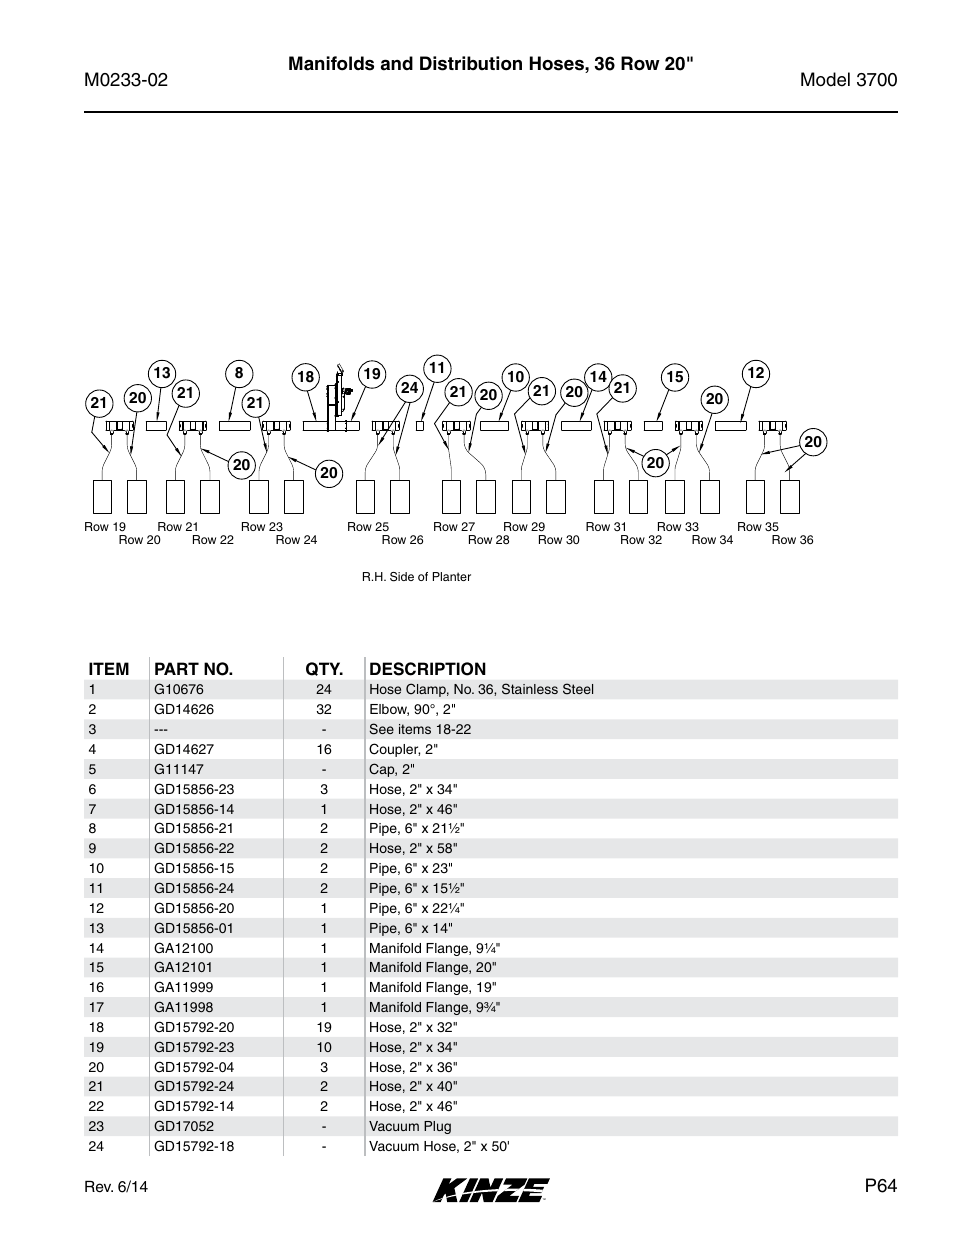 Manifolds and distribution hoses, 36 row 20 | Kinze 3700 Front Folding Planter Rev. 6/14 User Manual | Page 67 / 284